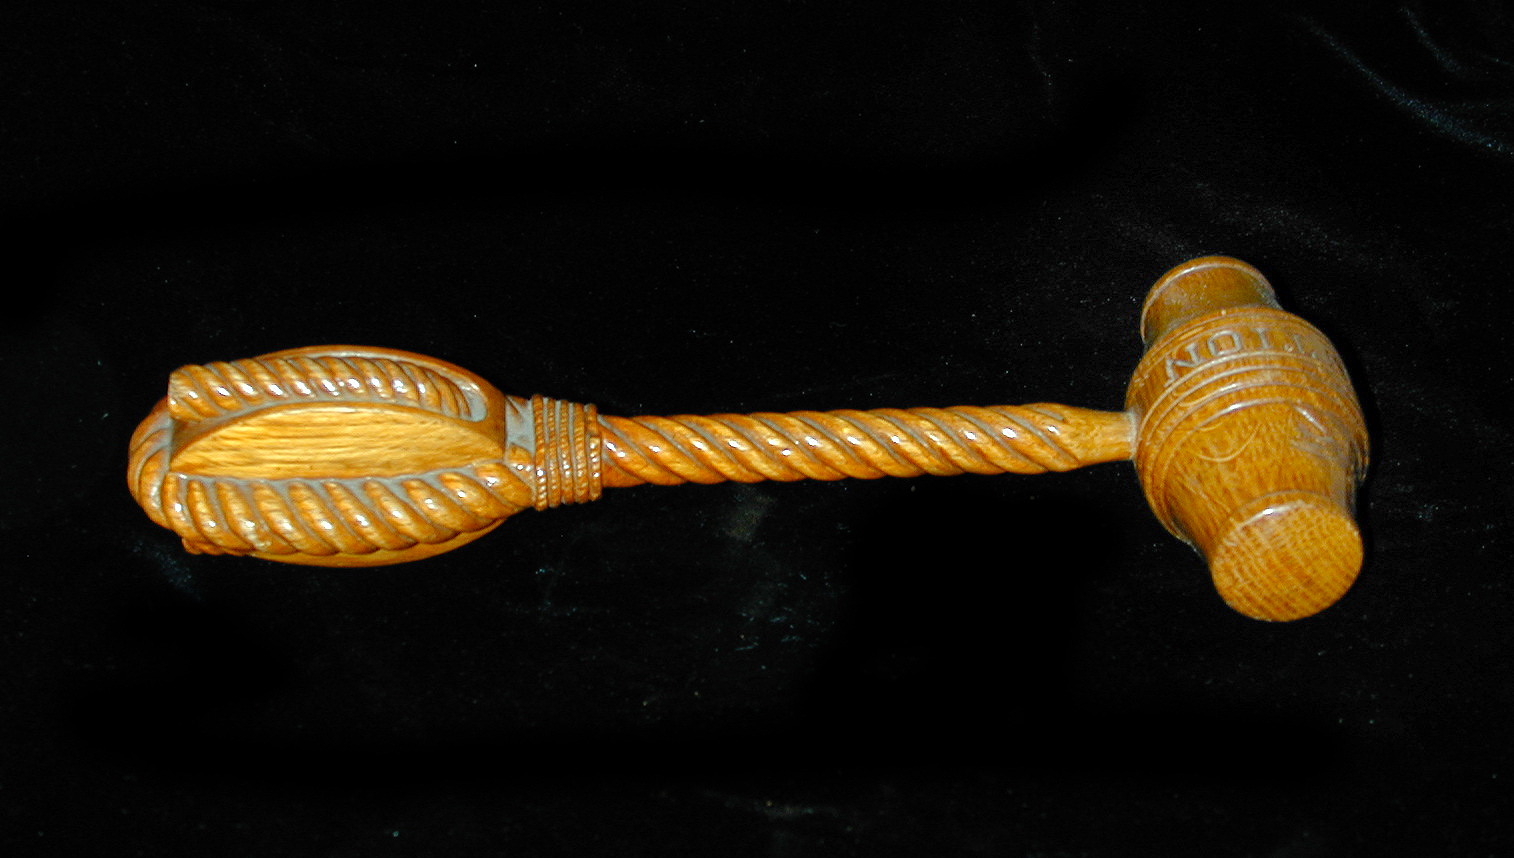 Gavel used to open the Dumbarton Oaks Conversations on 21 August 1944